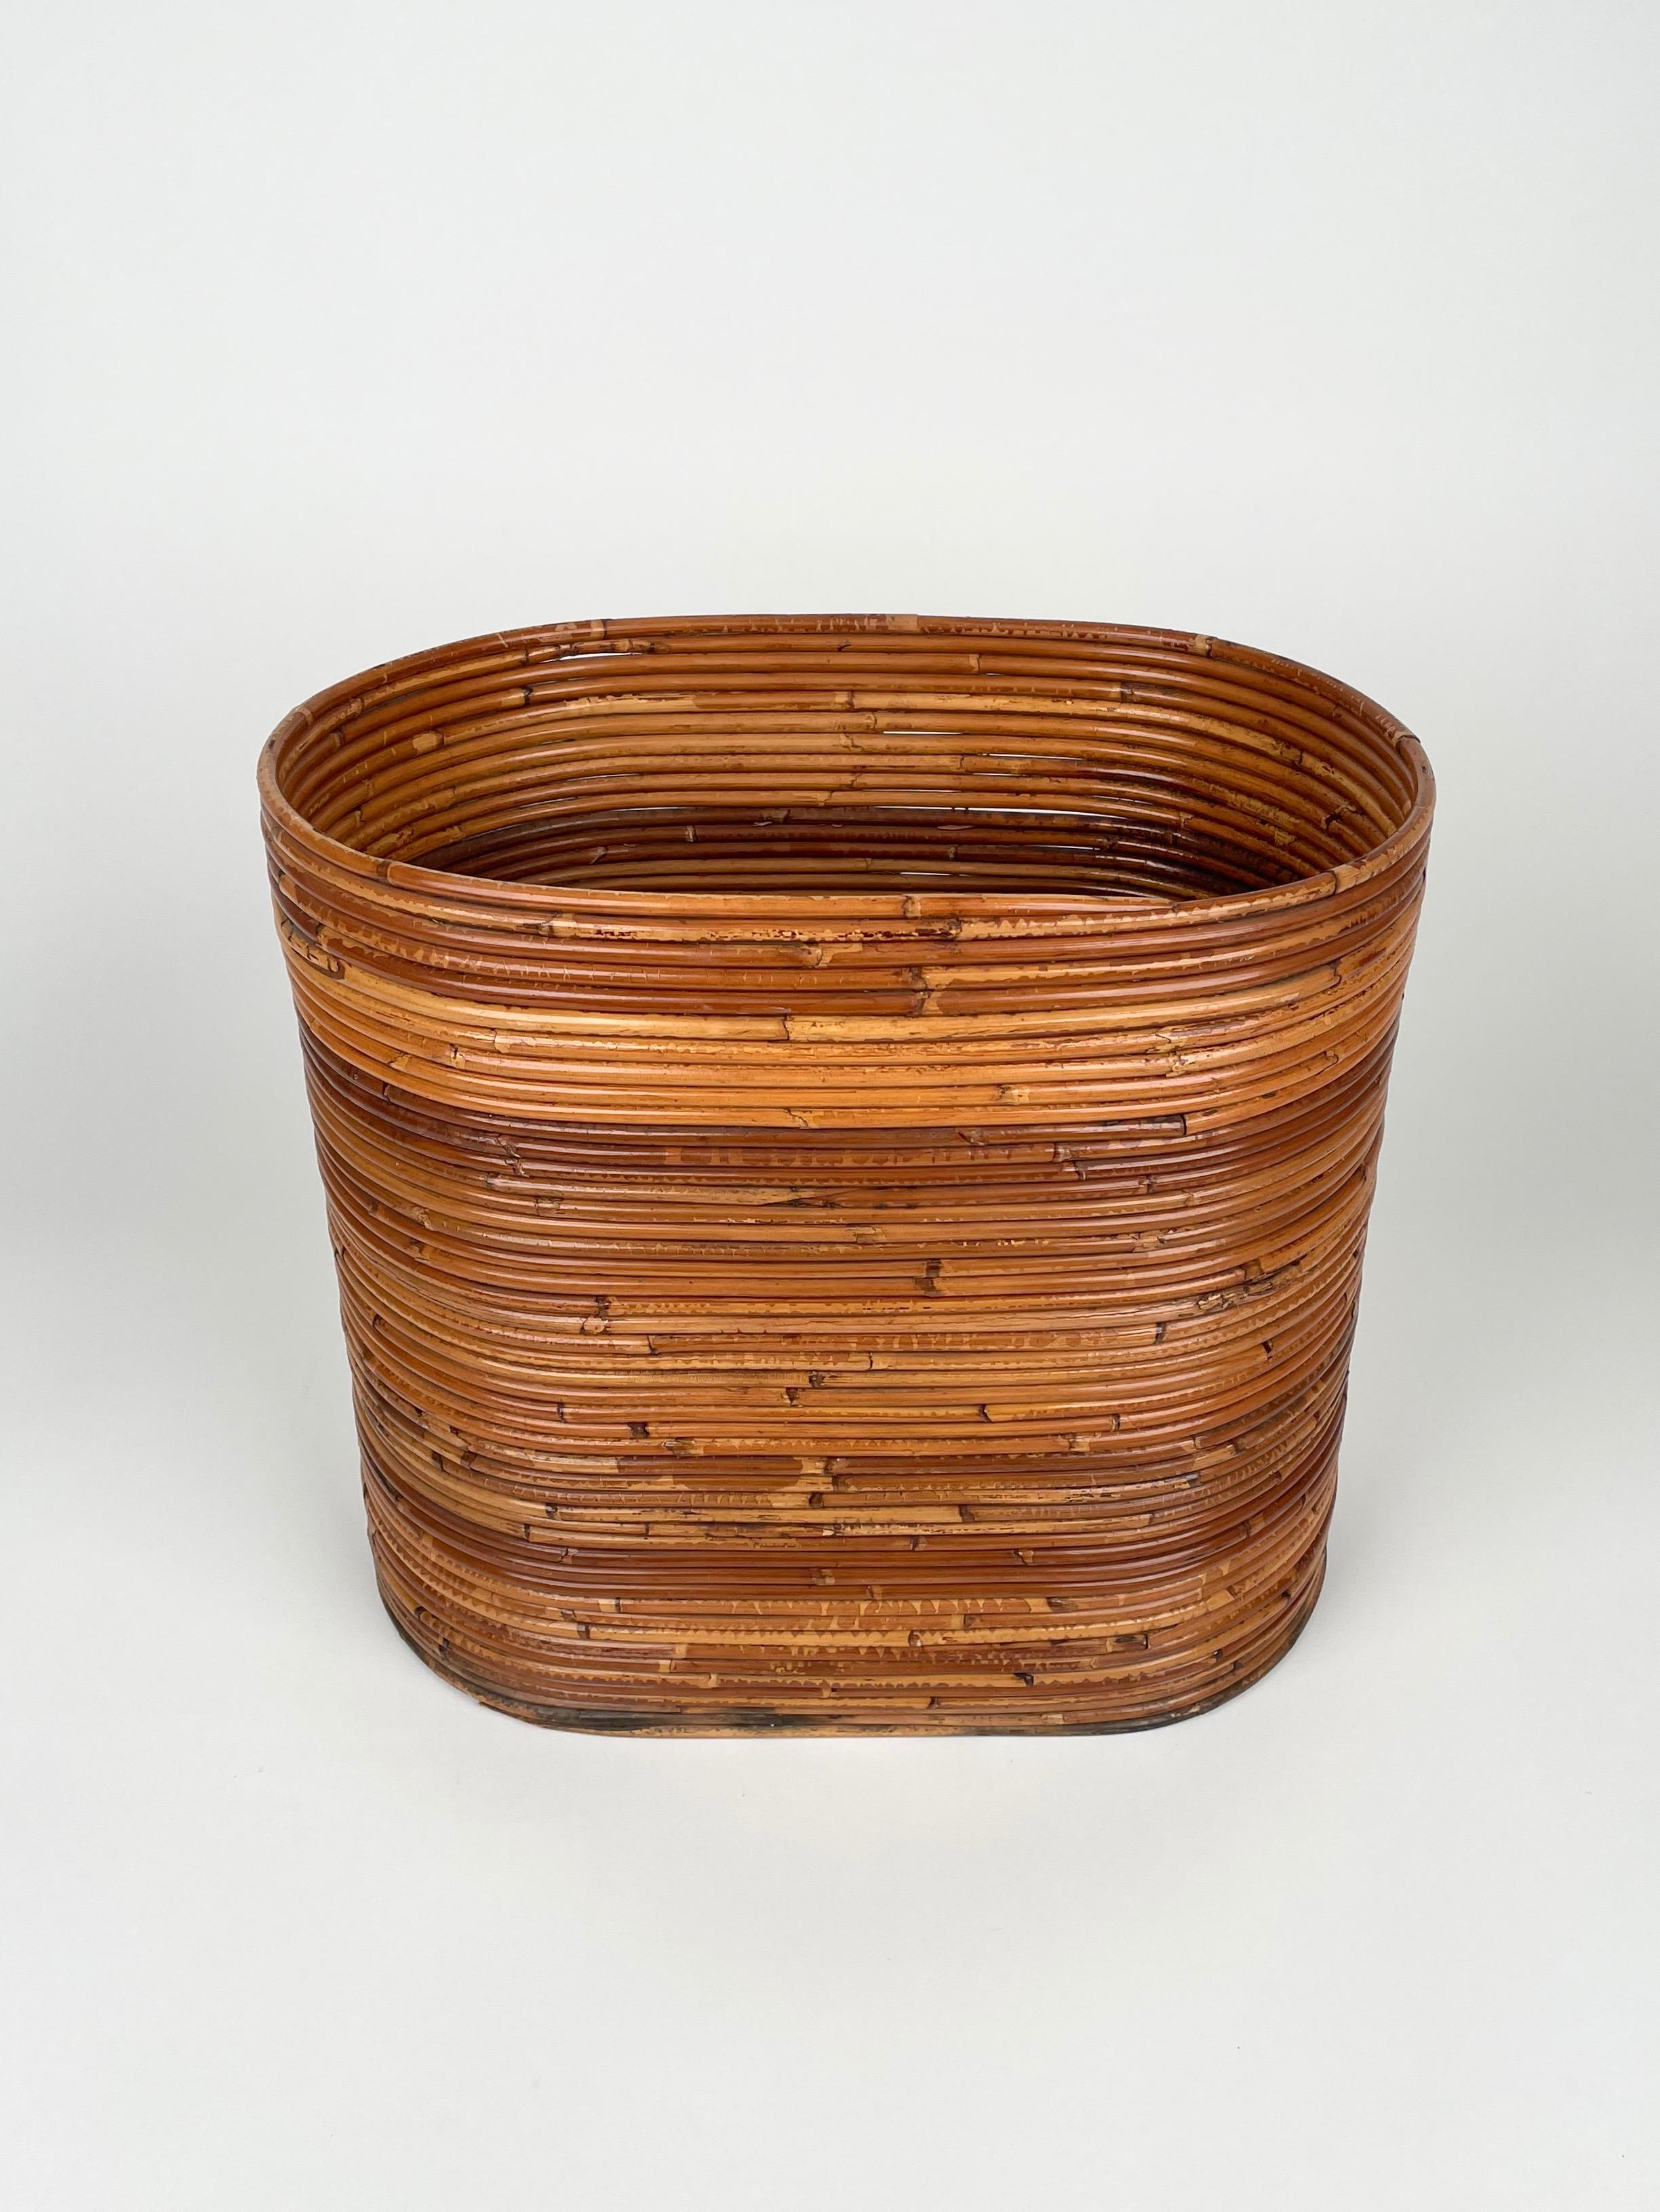 Oval basket plant holder vase in bamboo and rattan made in Italy in the 1960s.

An astonishing piece that will enrich a midcentury-style living room or studio.

